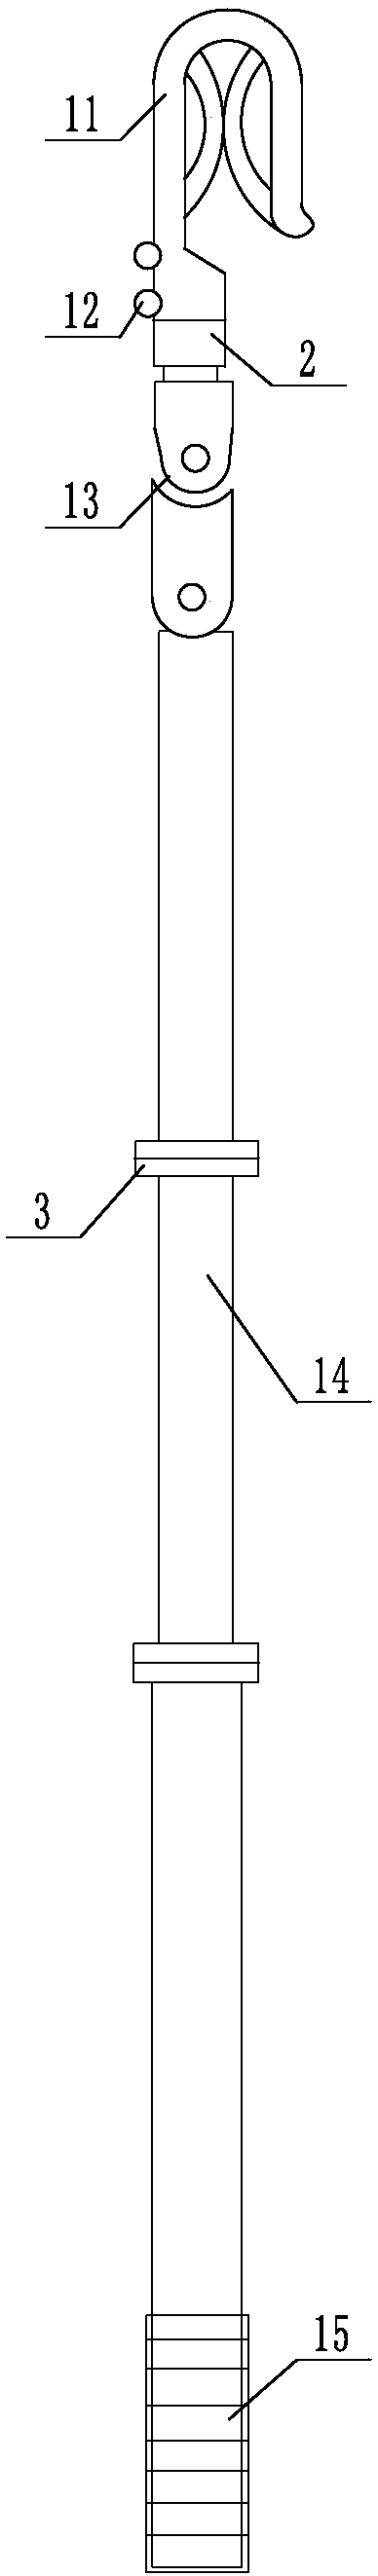 Special wiring rod for large current generator